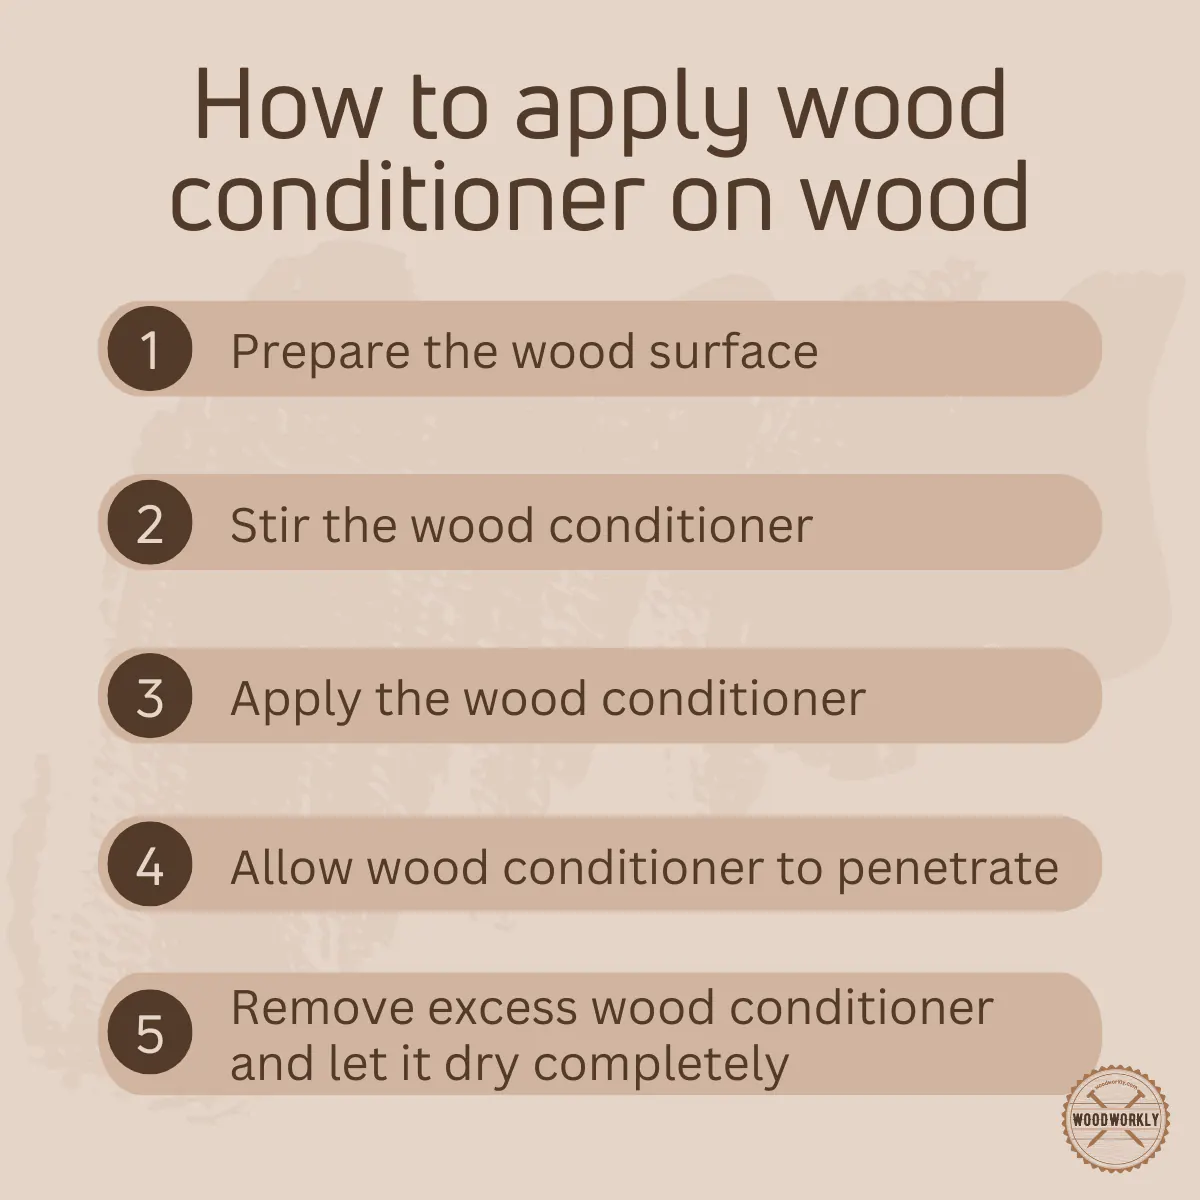 How to use wood conditioner on wood